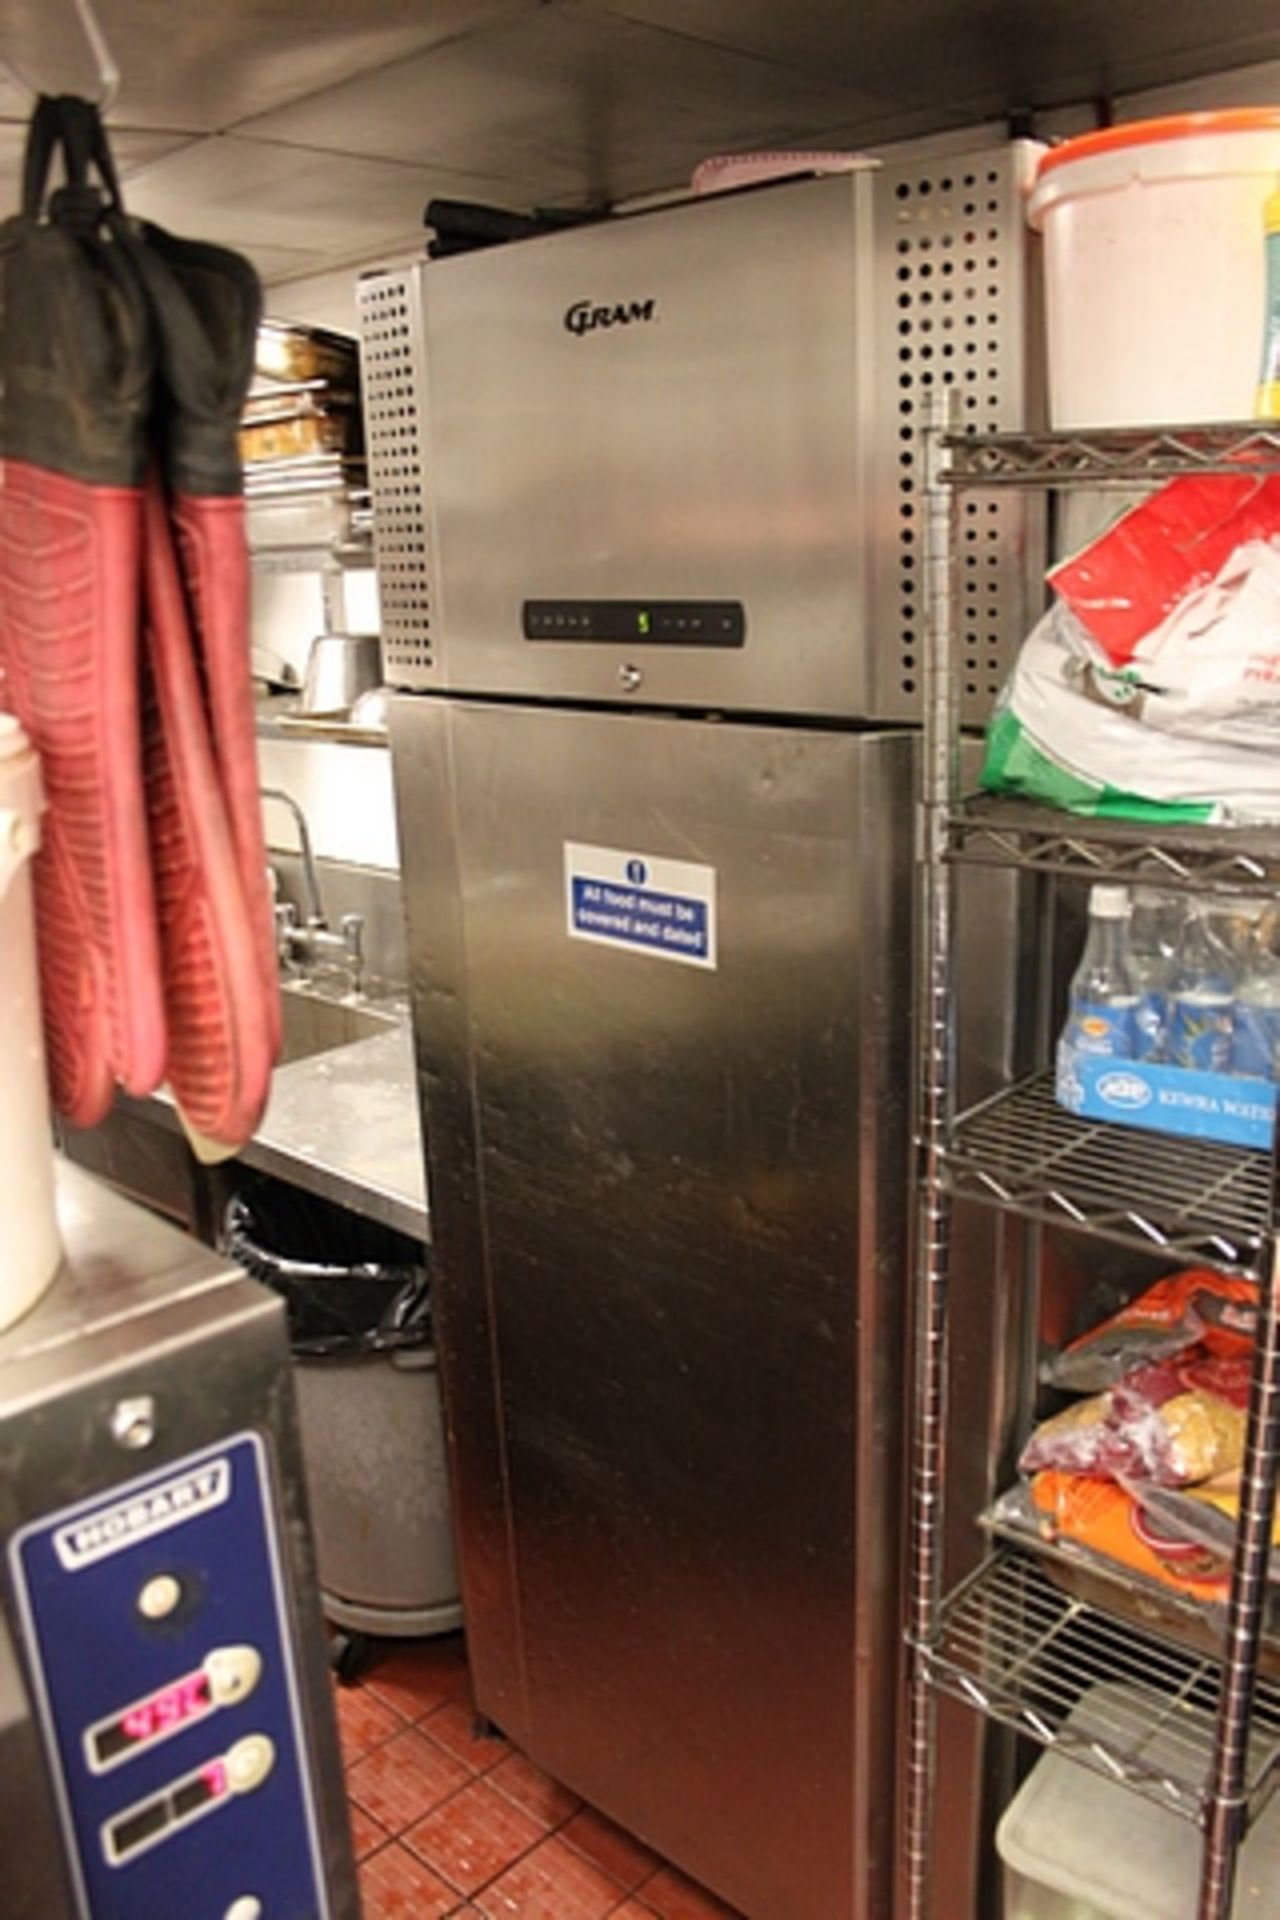 Gram stainless steel upright refrigerator approximately 600 litre capacity temperature range +2